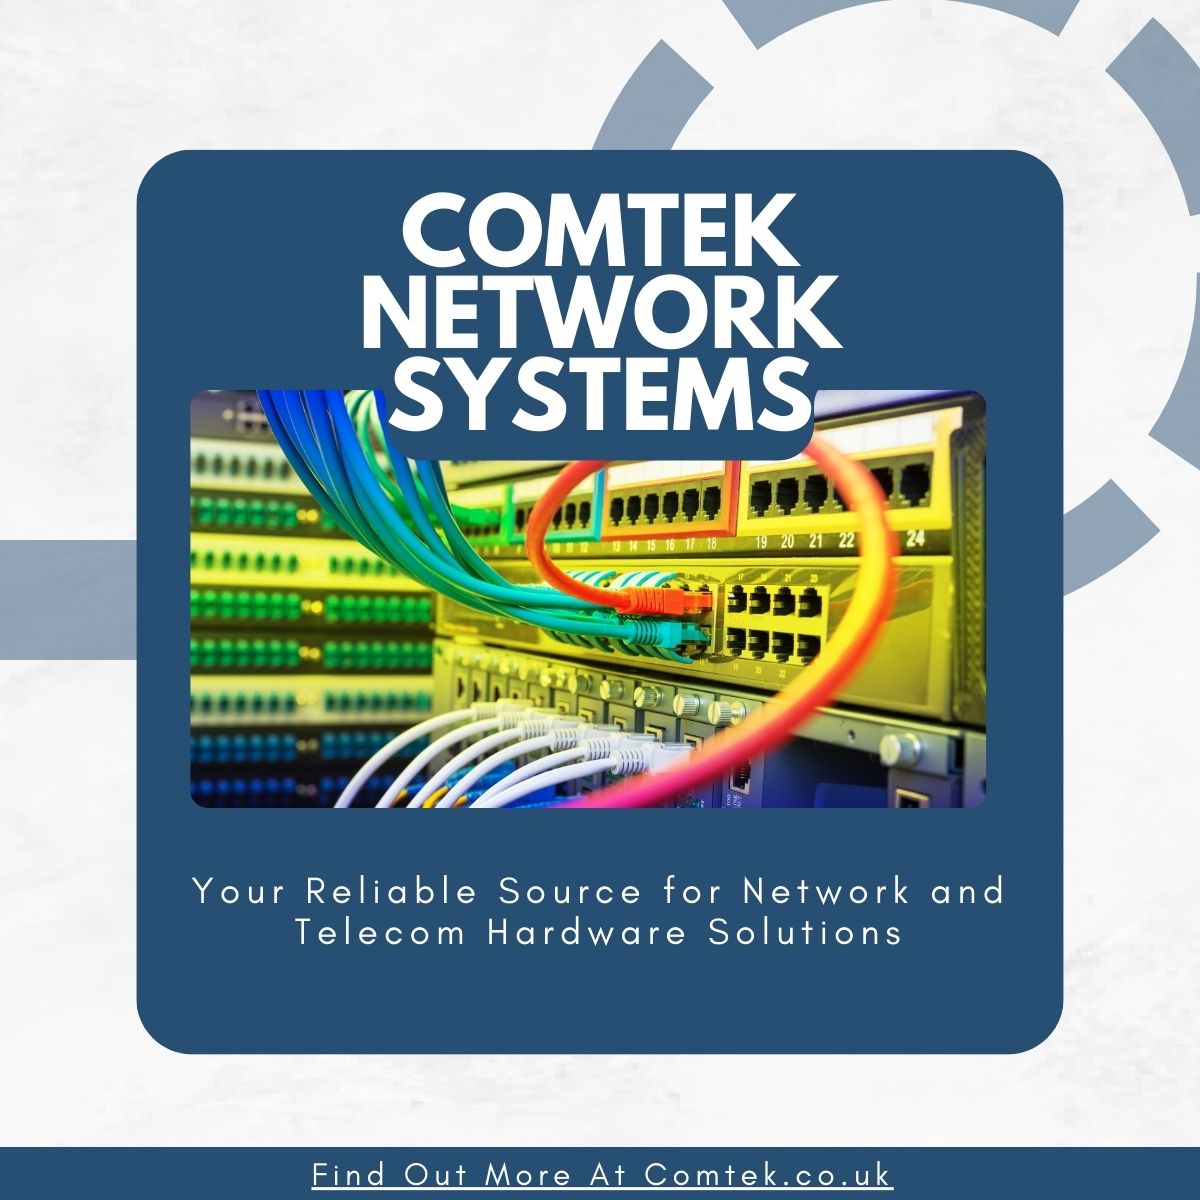 Your Reliable Source for Network and Telecom Hardware Solutions.
comtek.co.uk
#CircularEconomy #NetZero #Sustainability #Reuse #Recycle #Repair #Reduce #NetworkingSolutions #TechEquipment #NetworkInfrastructure